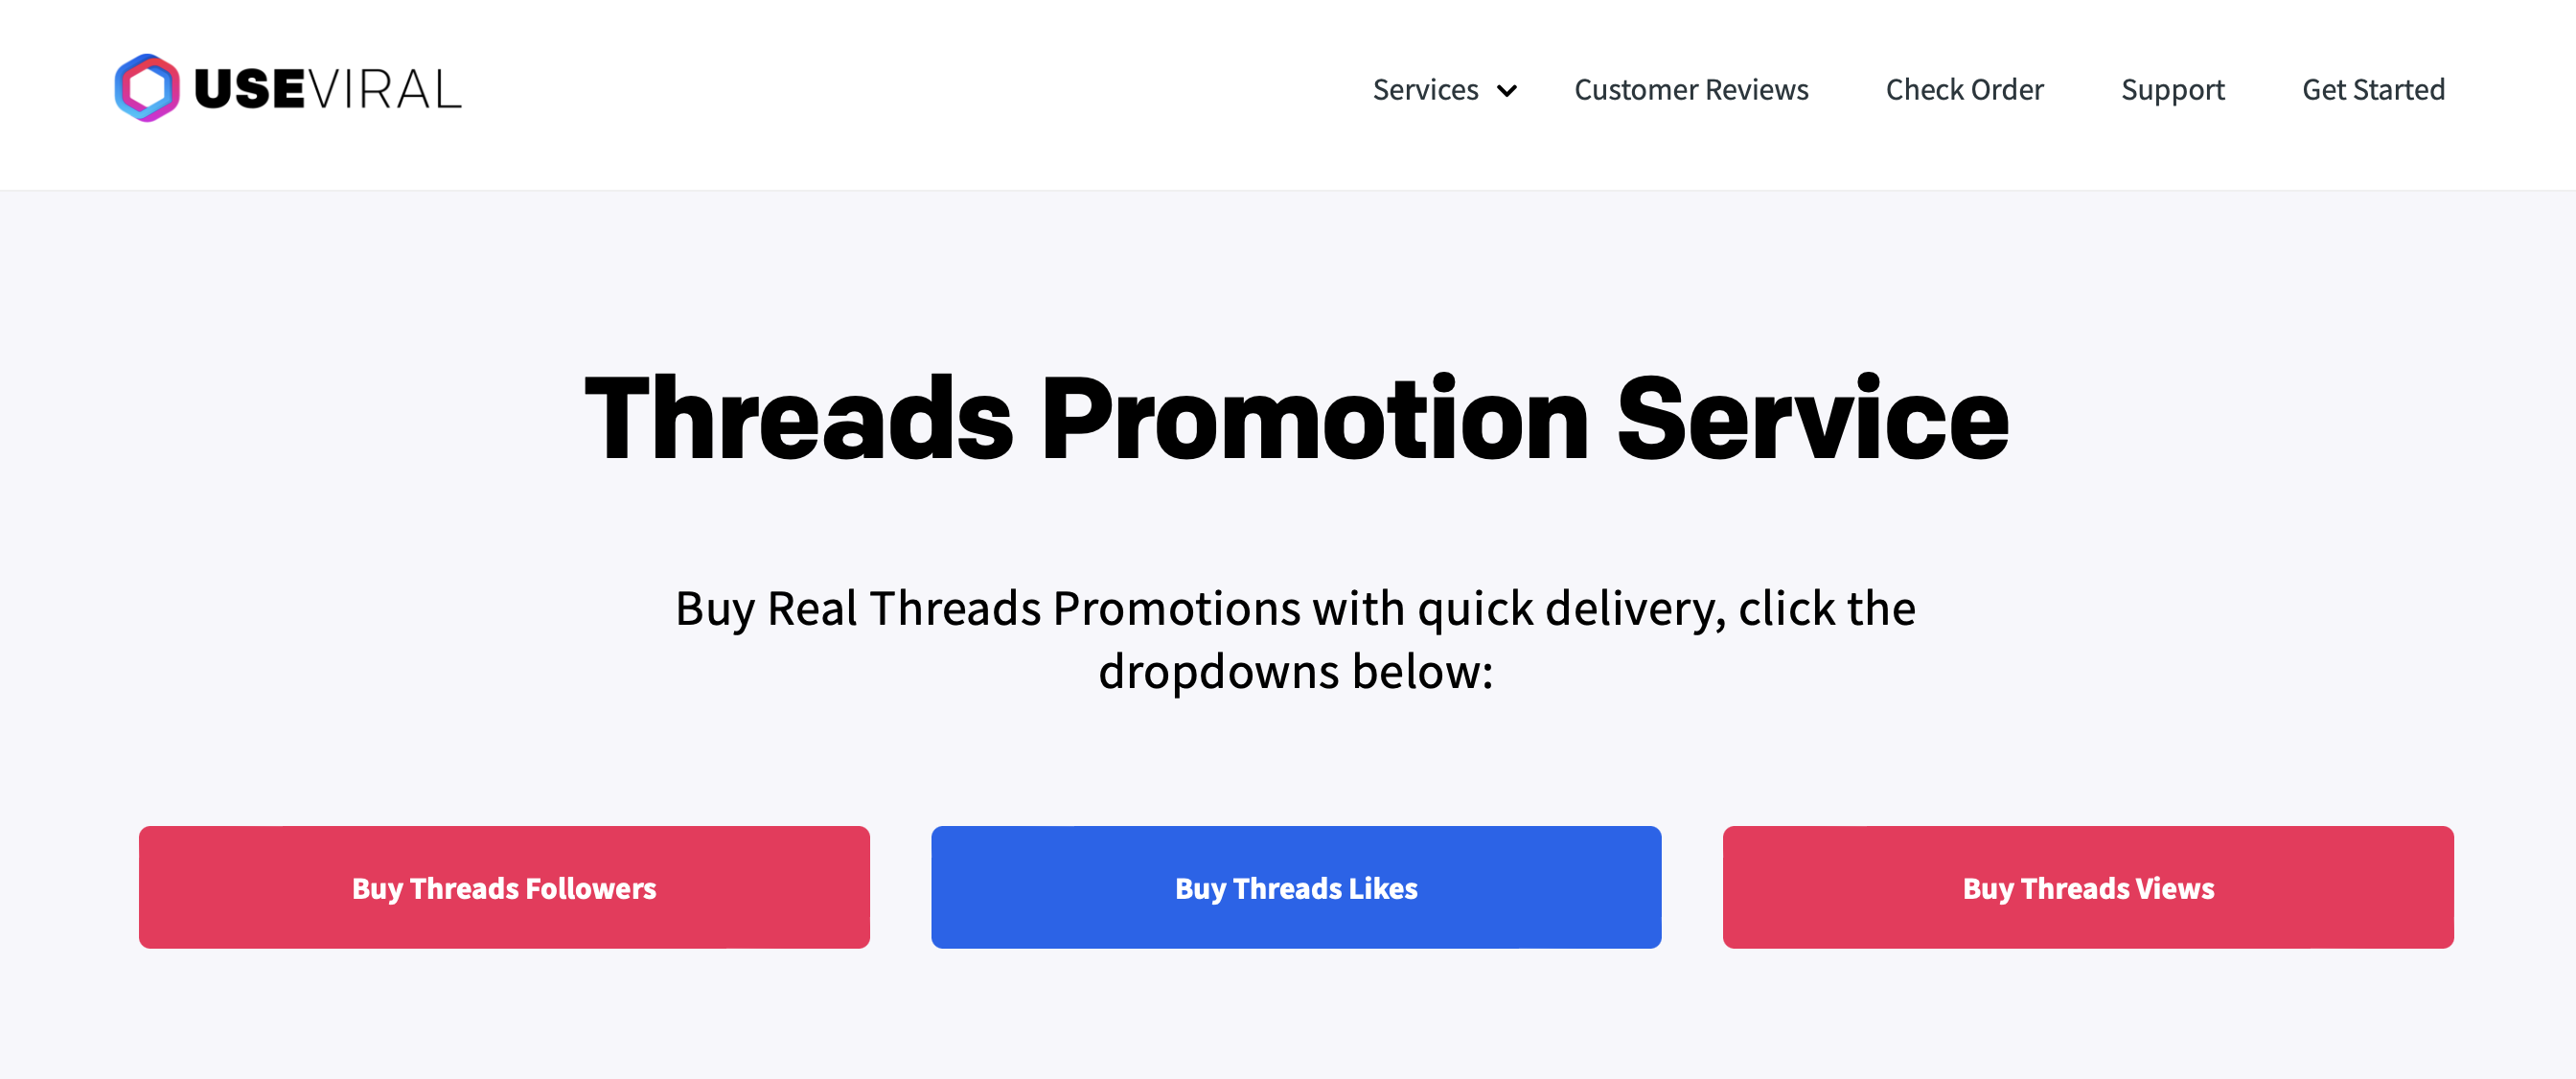 Buy Threads Likes From UseViral